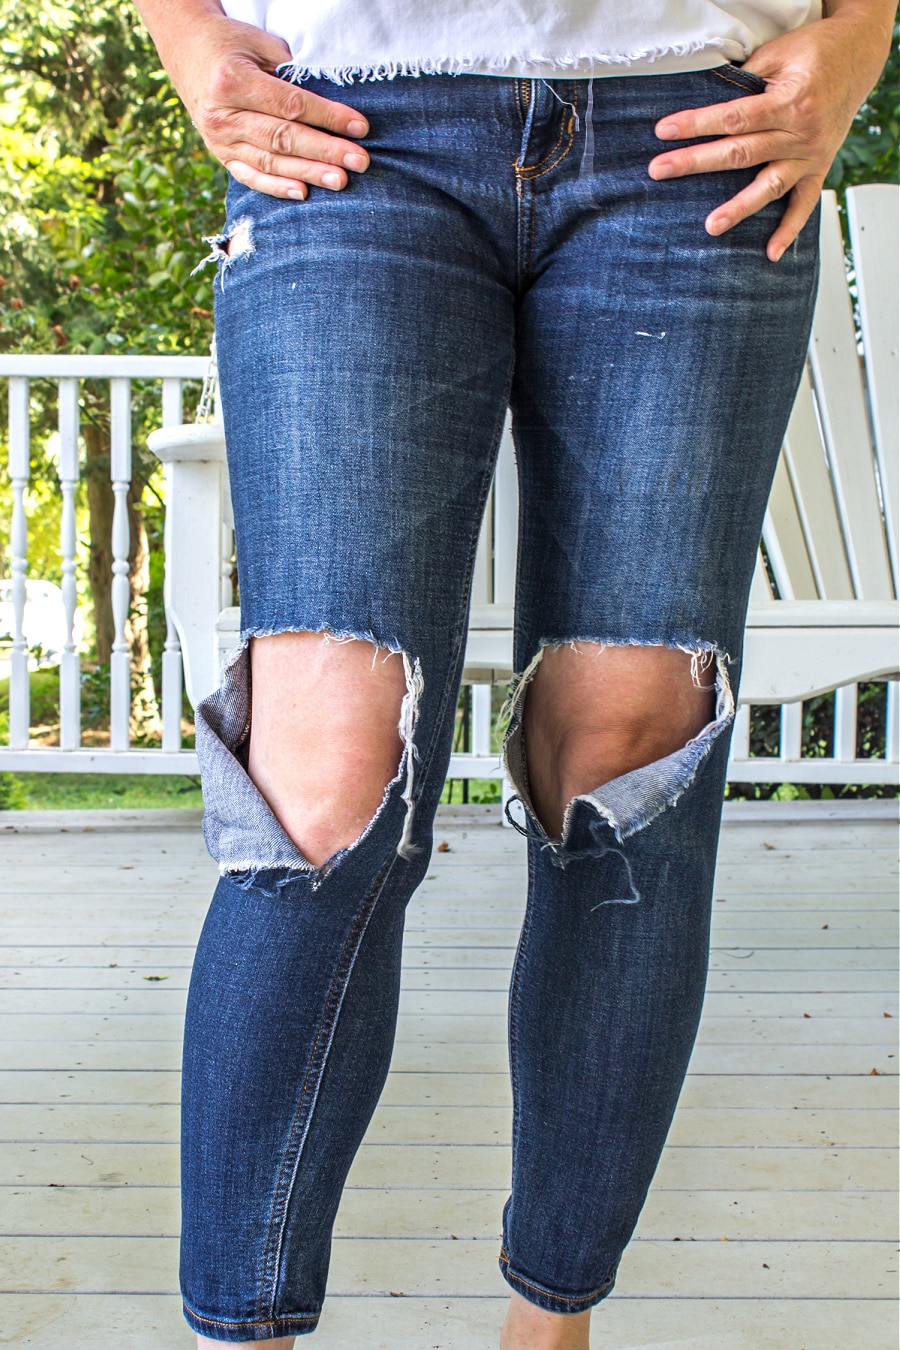 Jeans with knee holes that have stretched and split that need to be patched.